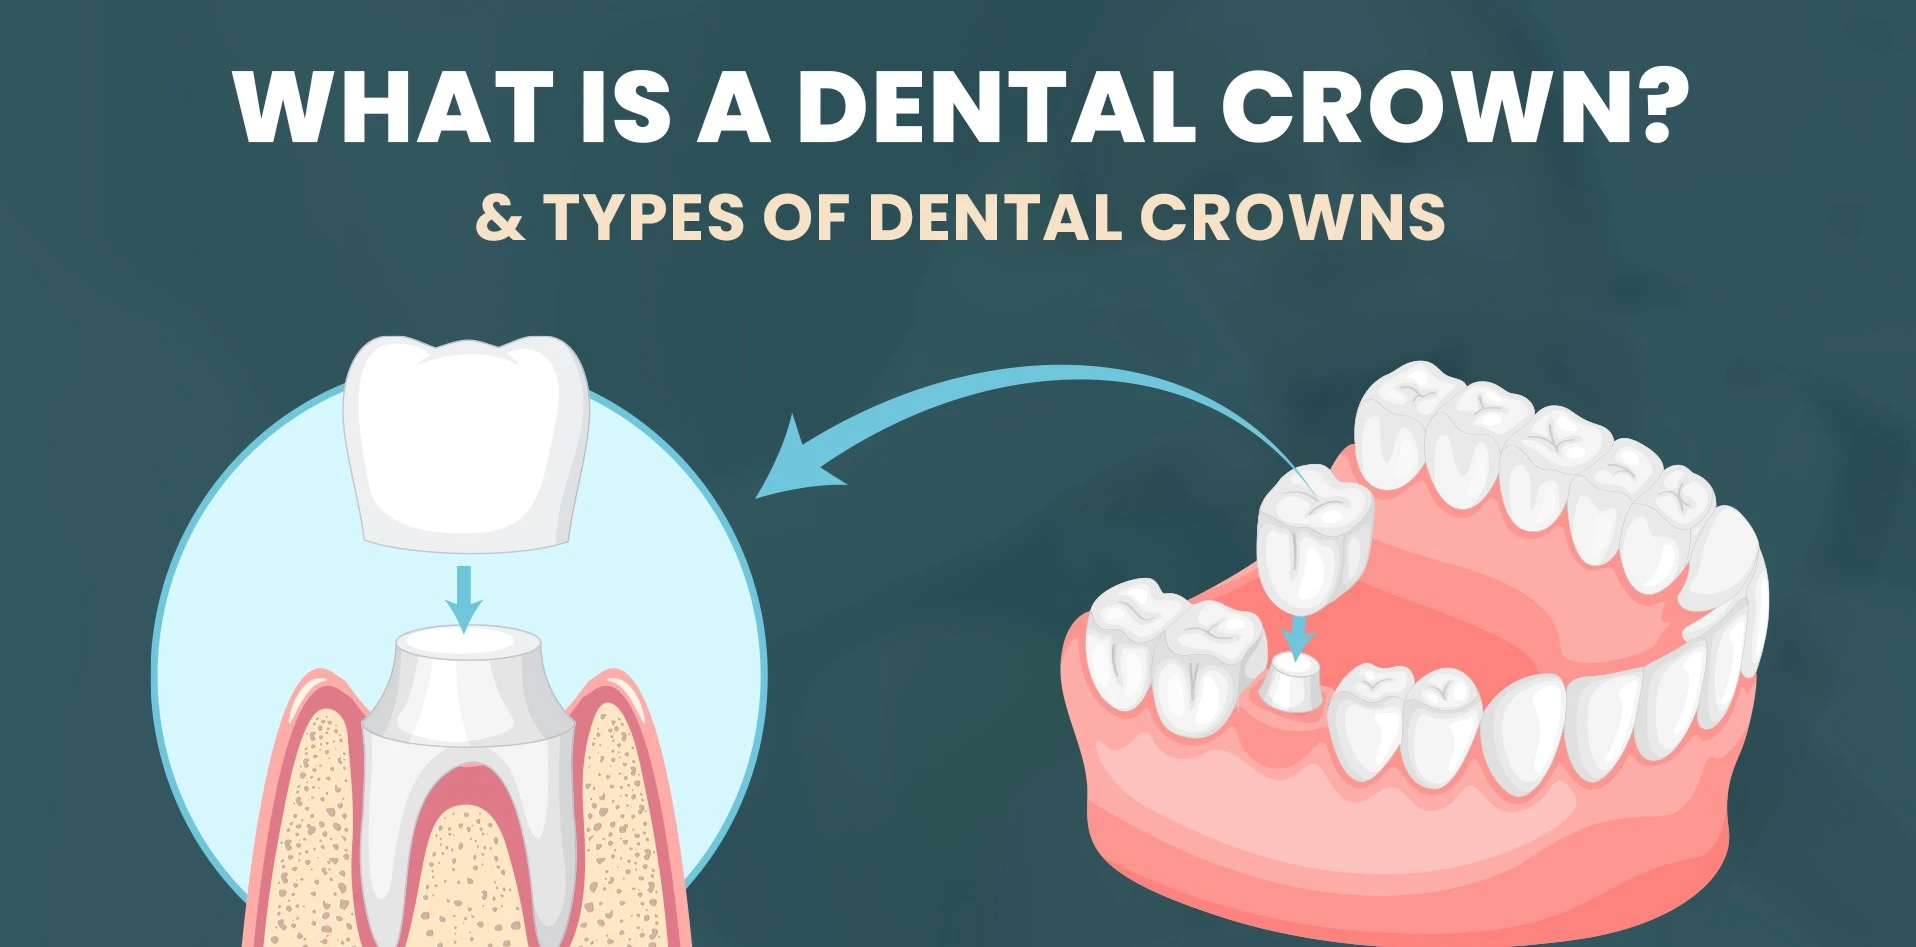 What are the Different Types of Dental Crowns?